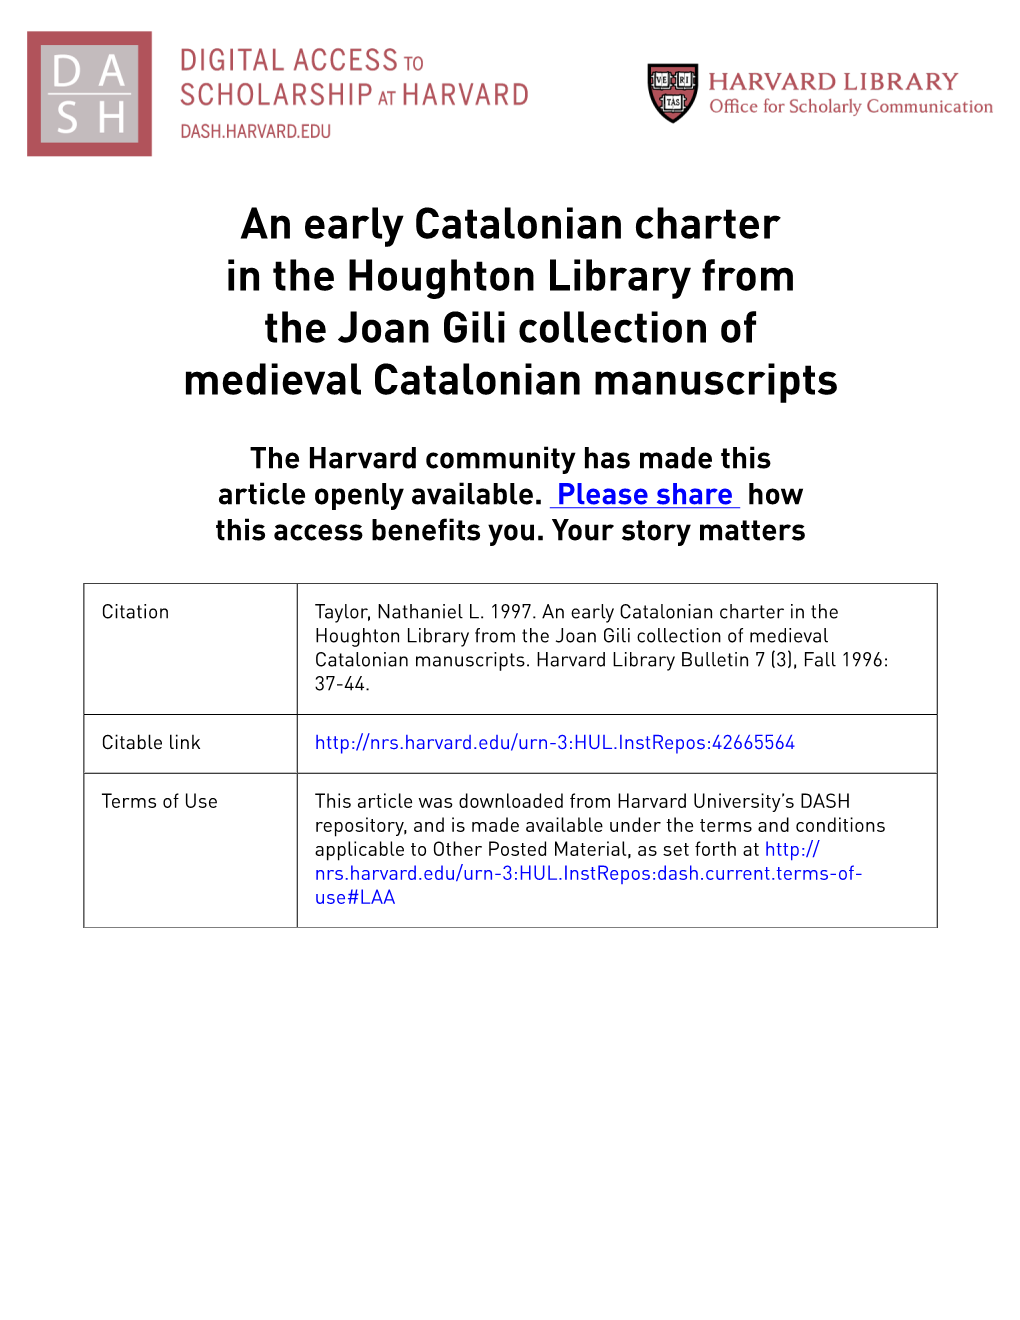 An Early Catalonian Charter in the Houghton Library from the Joan Gili Collection of Medieval Catalonian Manuscripts